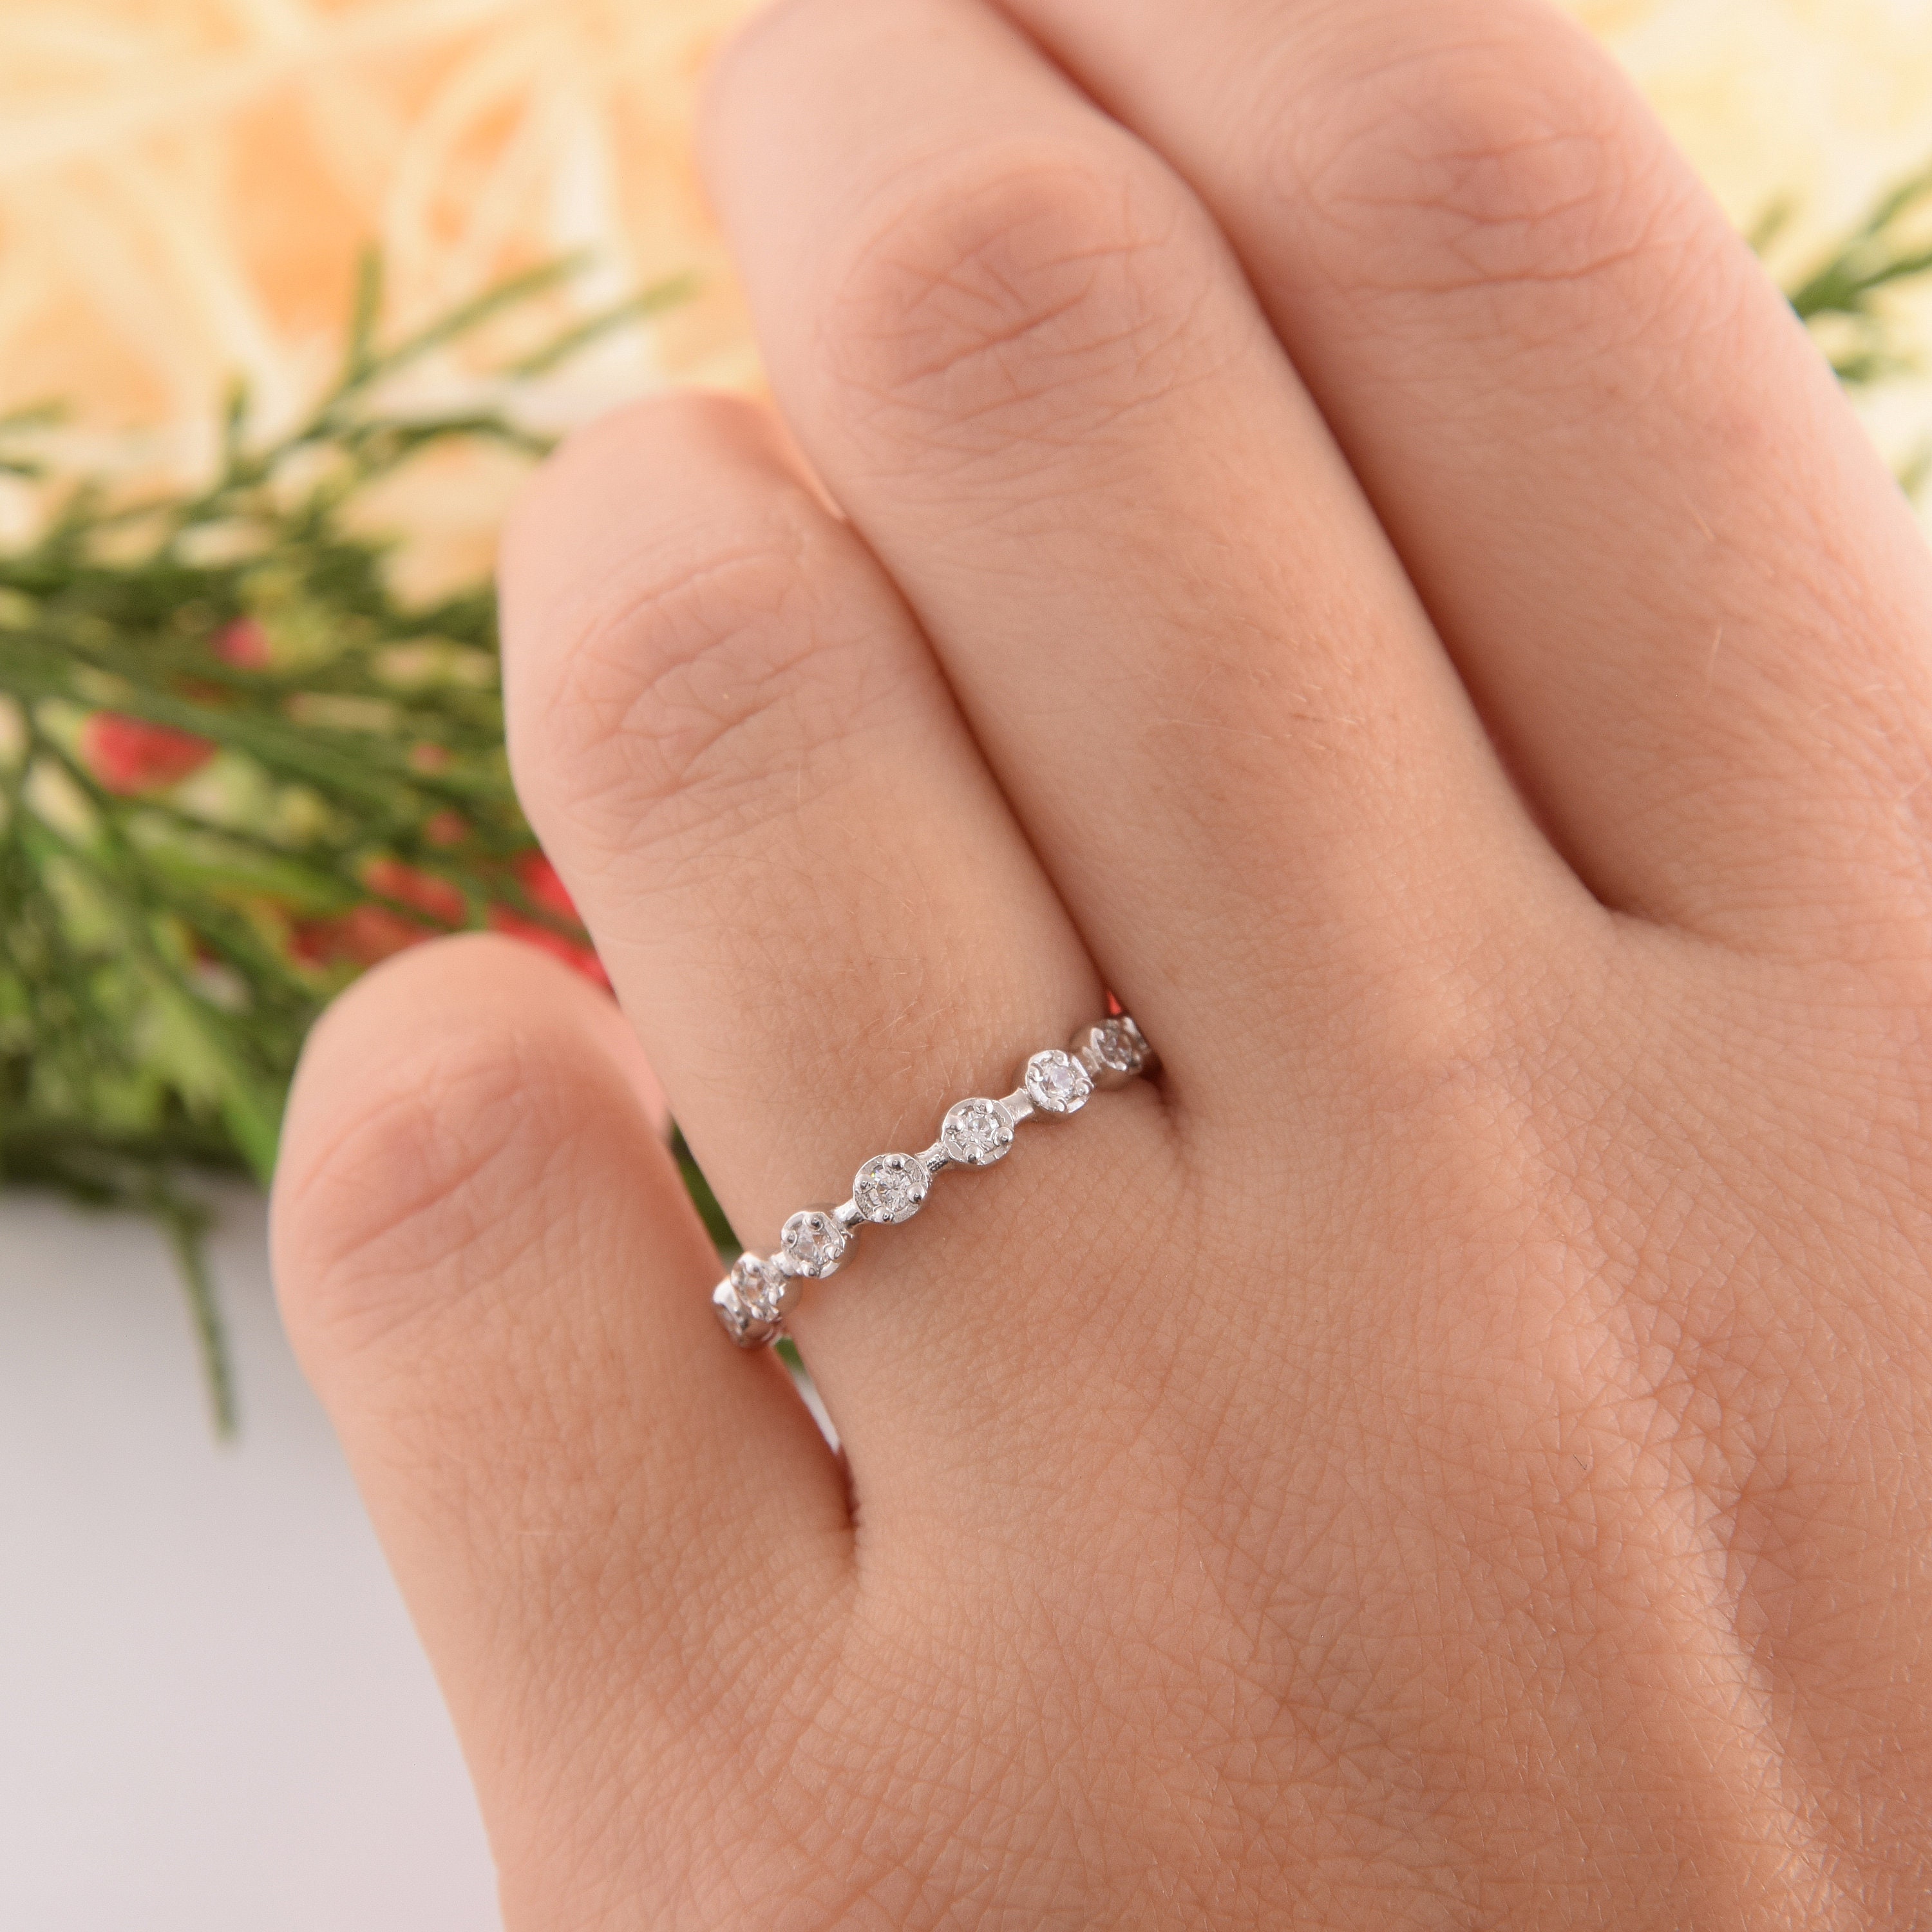 Simple & Delicate 925 Sterling Silver Womens Wedding Band, Dainty